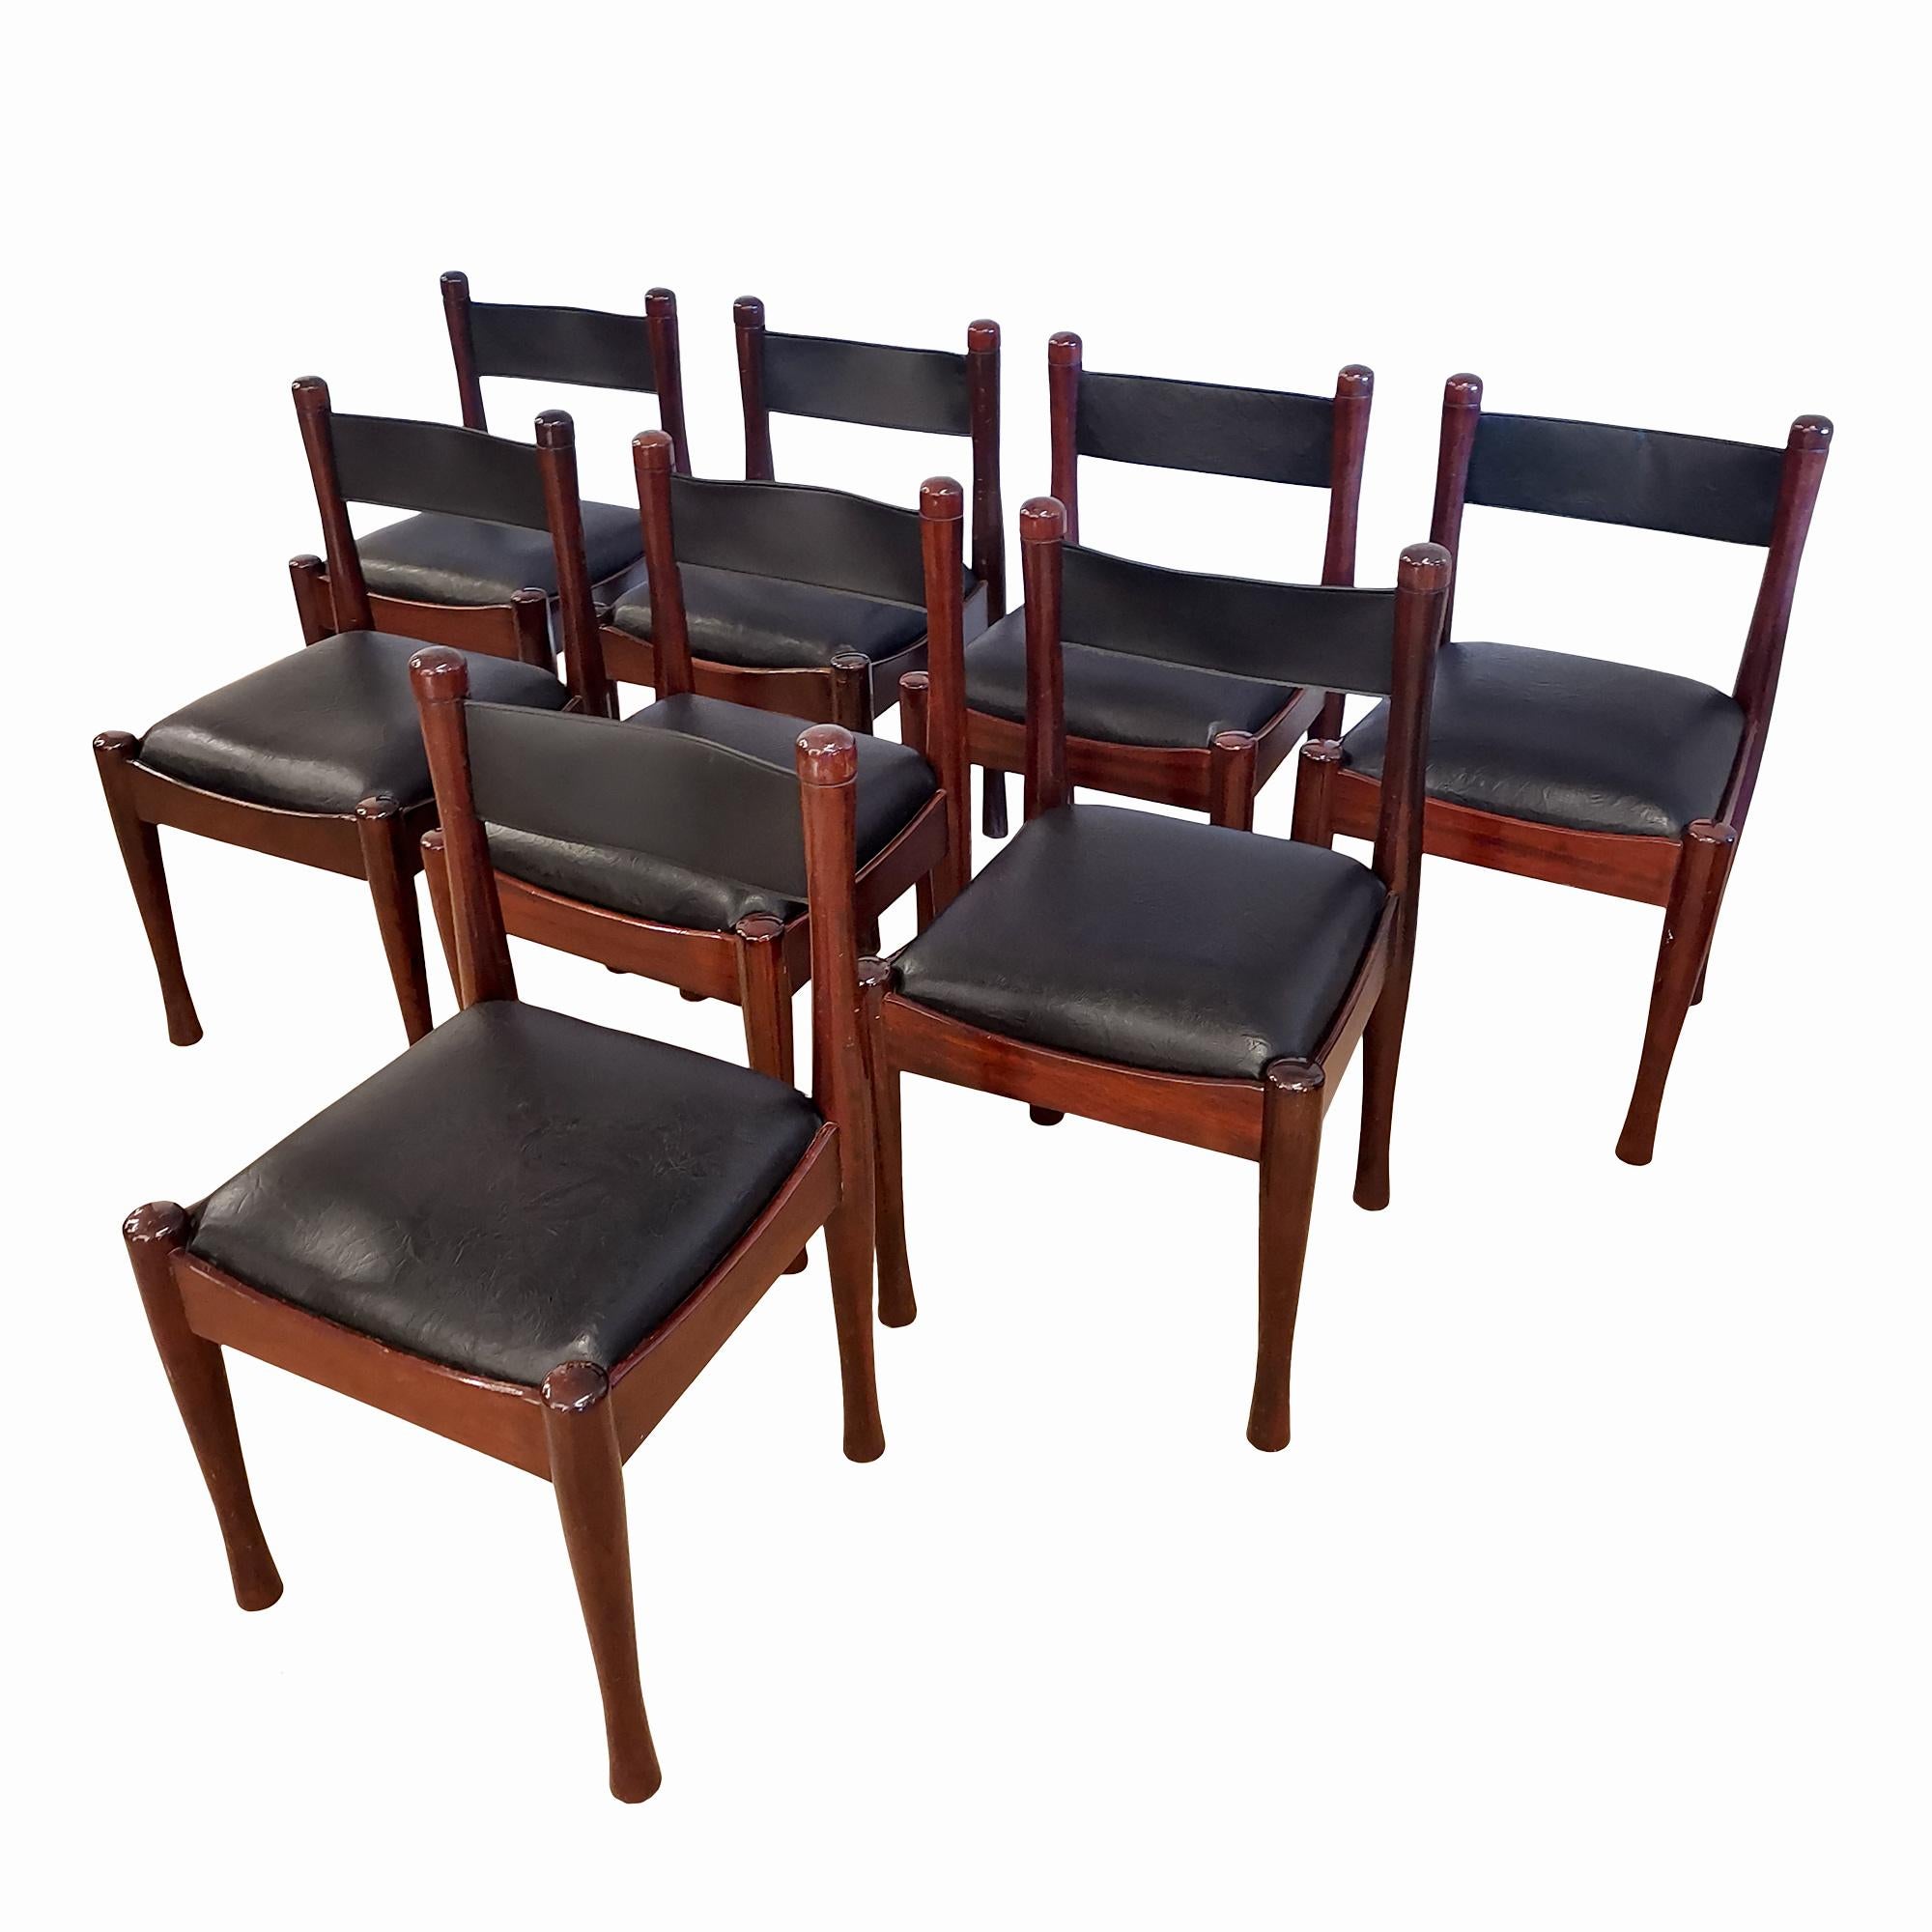 Set of eight chairs in solid mahogany, seats and backs in imitation leather. Very good quality. Original condition.

Design: Silvio Coppola for Bernini.

Italy, 1970.

